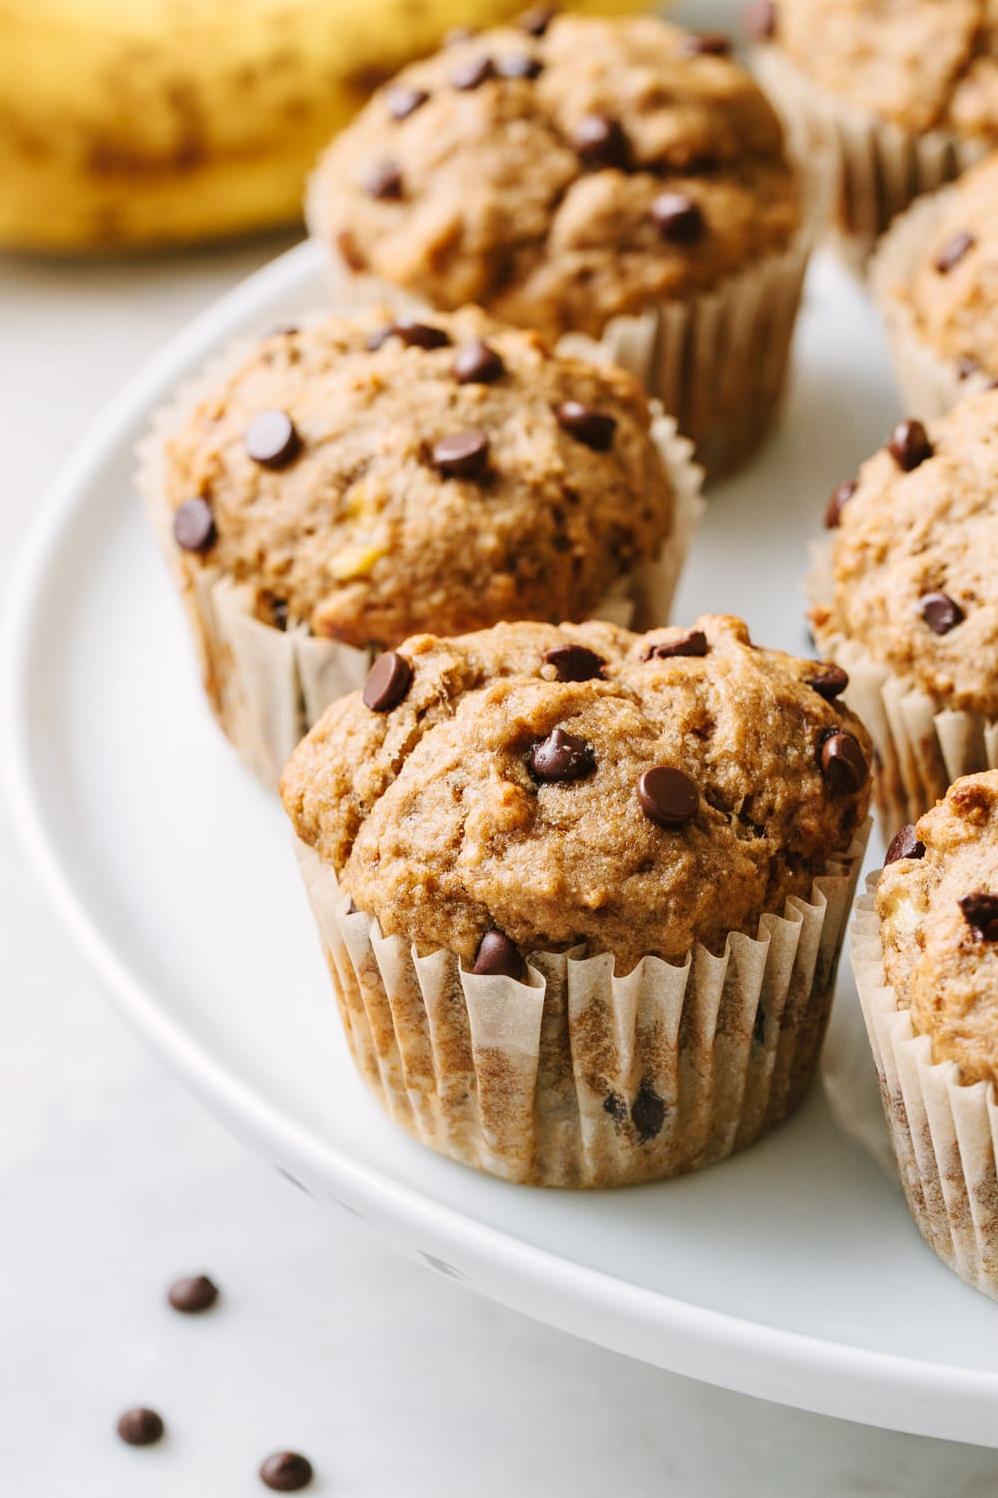  Is it breakfast? Is it dessert? Who cares! These banana bread muffins are a guilt-free indulgence.